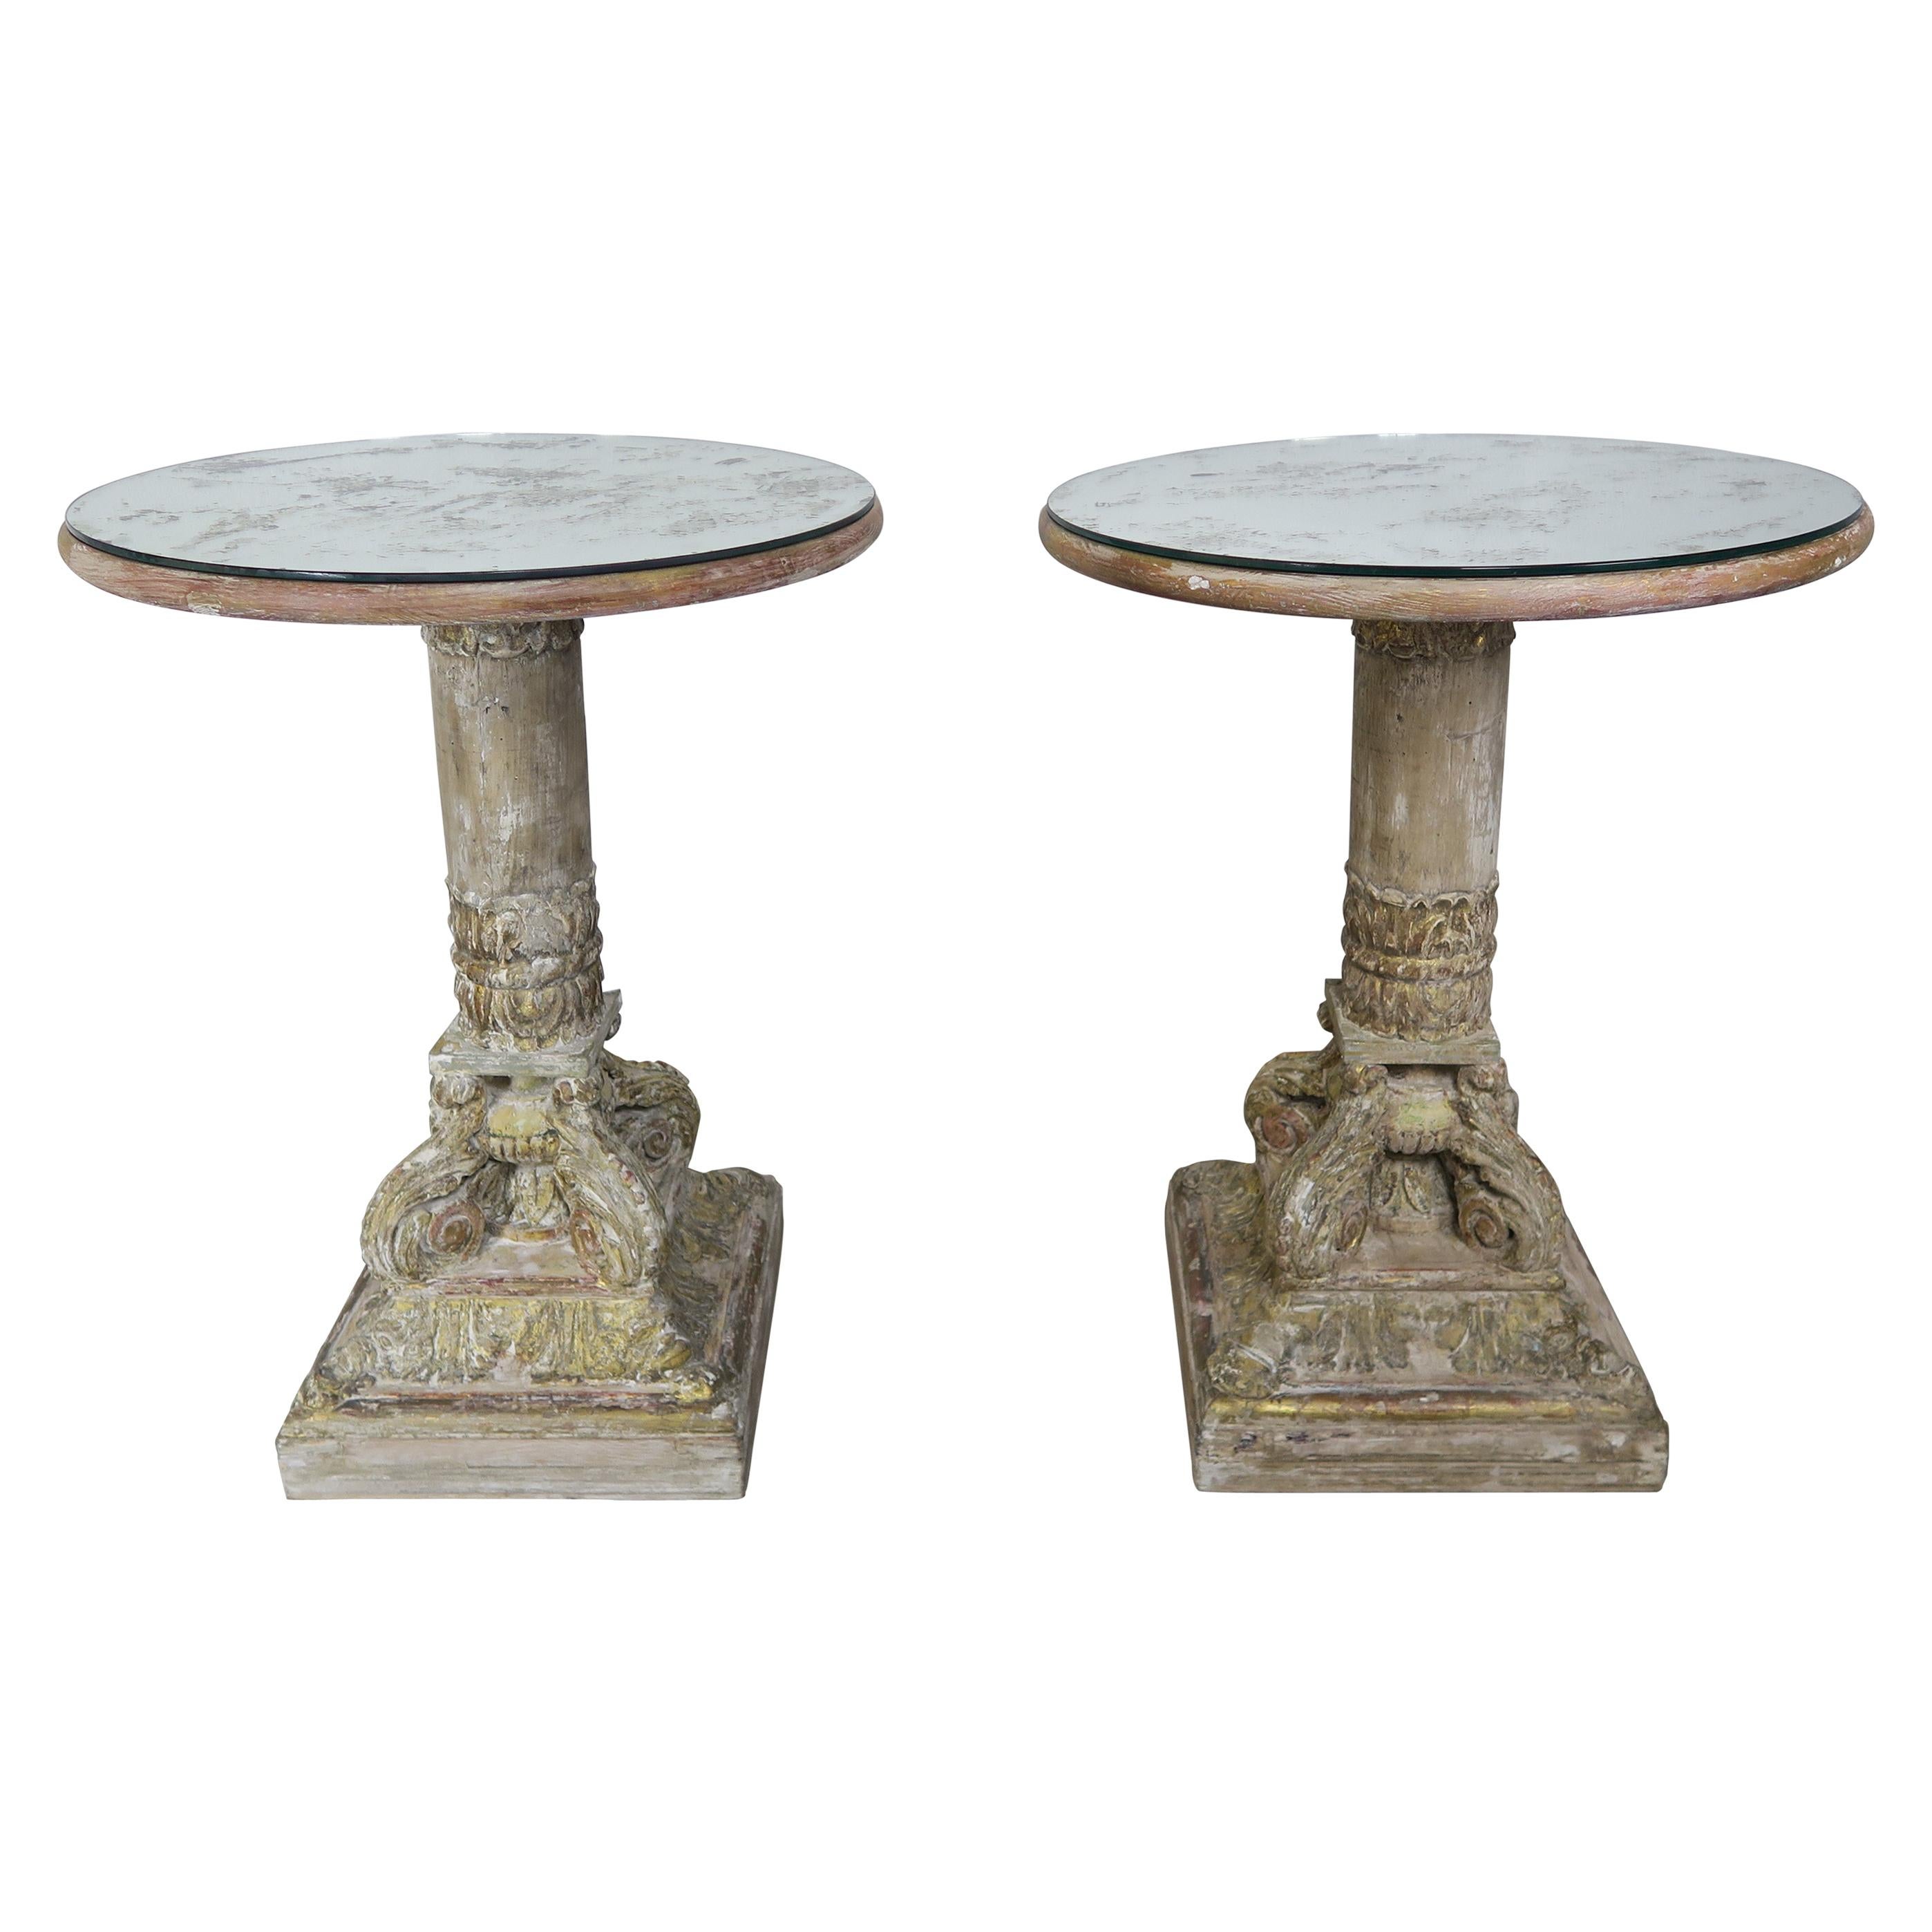 Pair of Carved Wood Italian Tables with Mirrored Tops